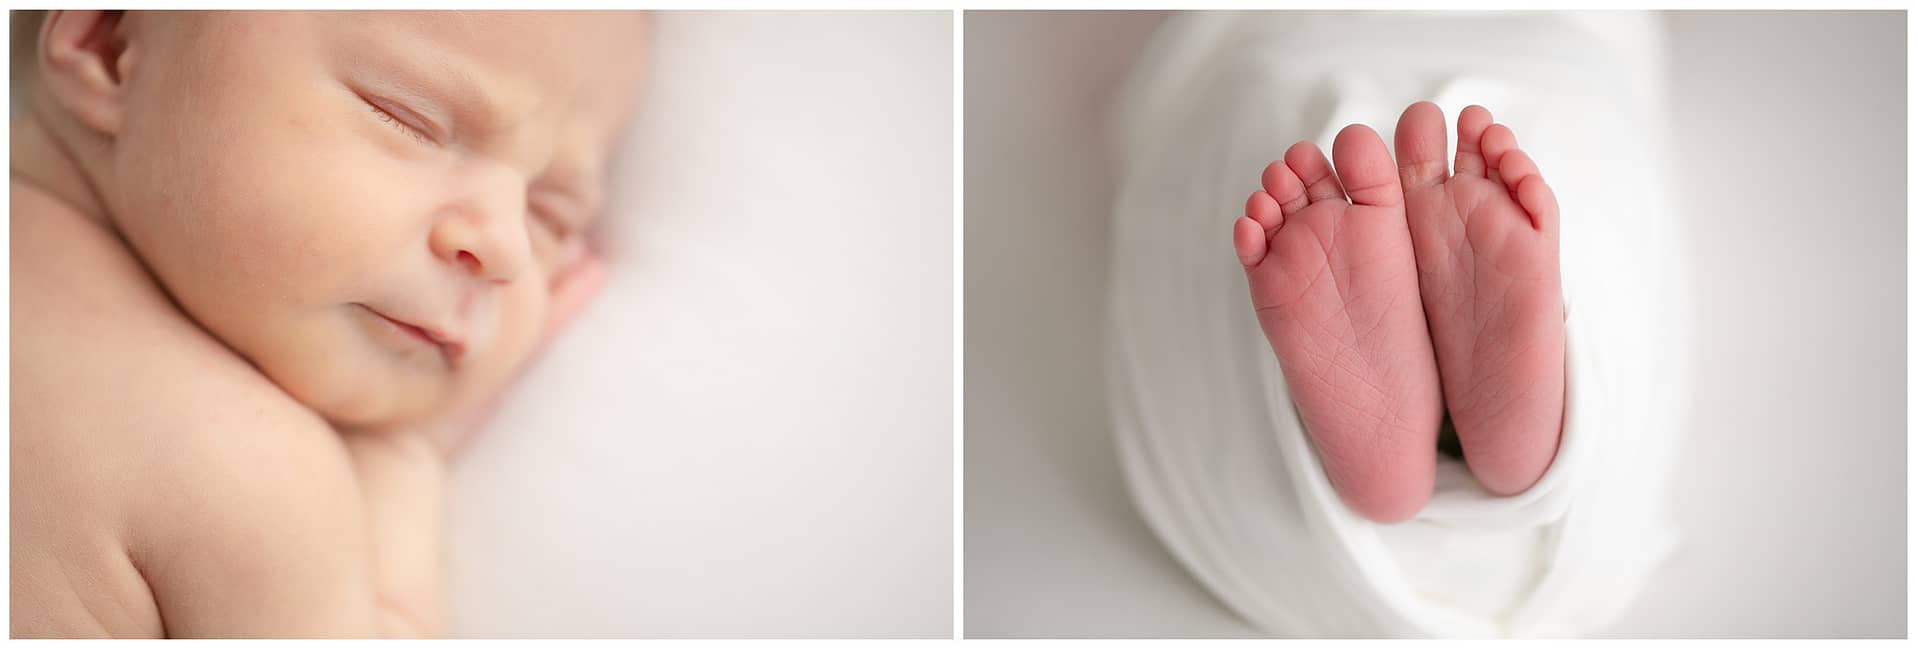 Up close details of baby. Photo by Tiffany Hix Photography.